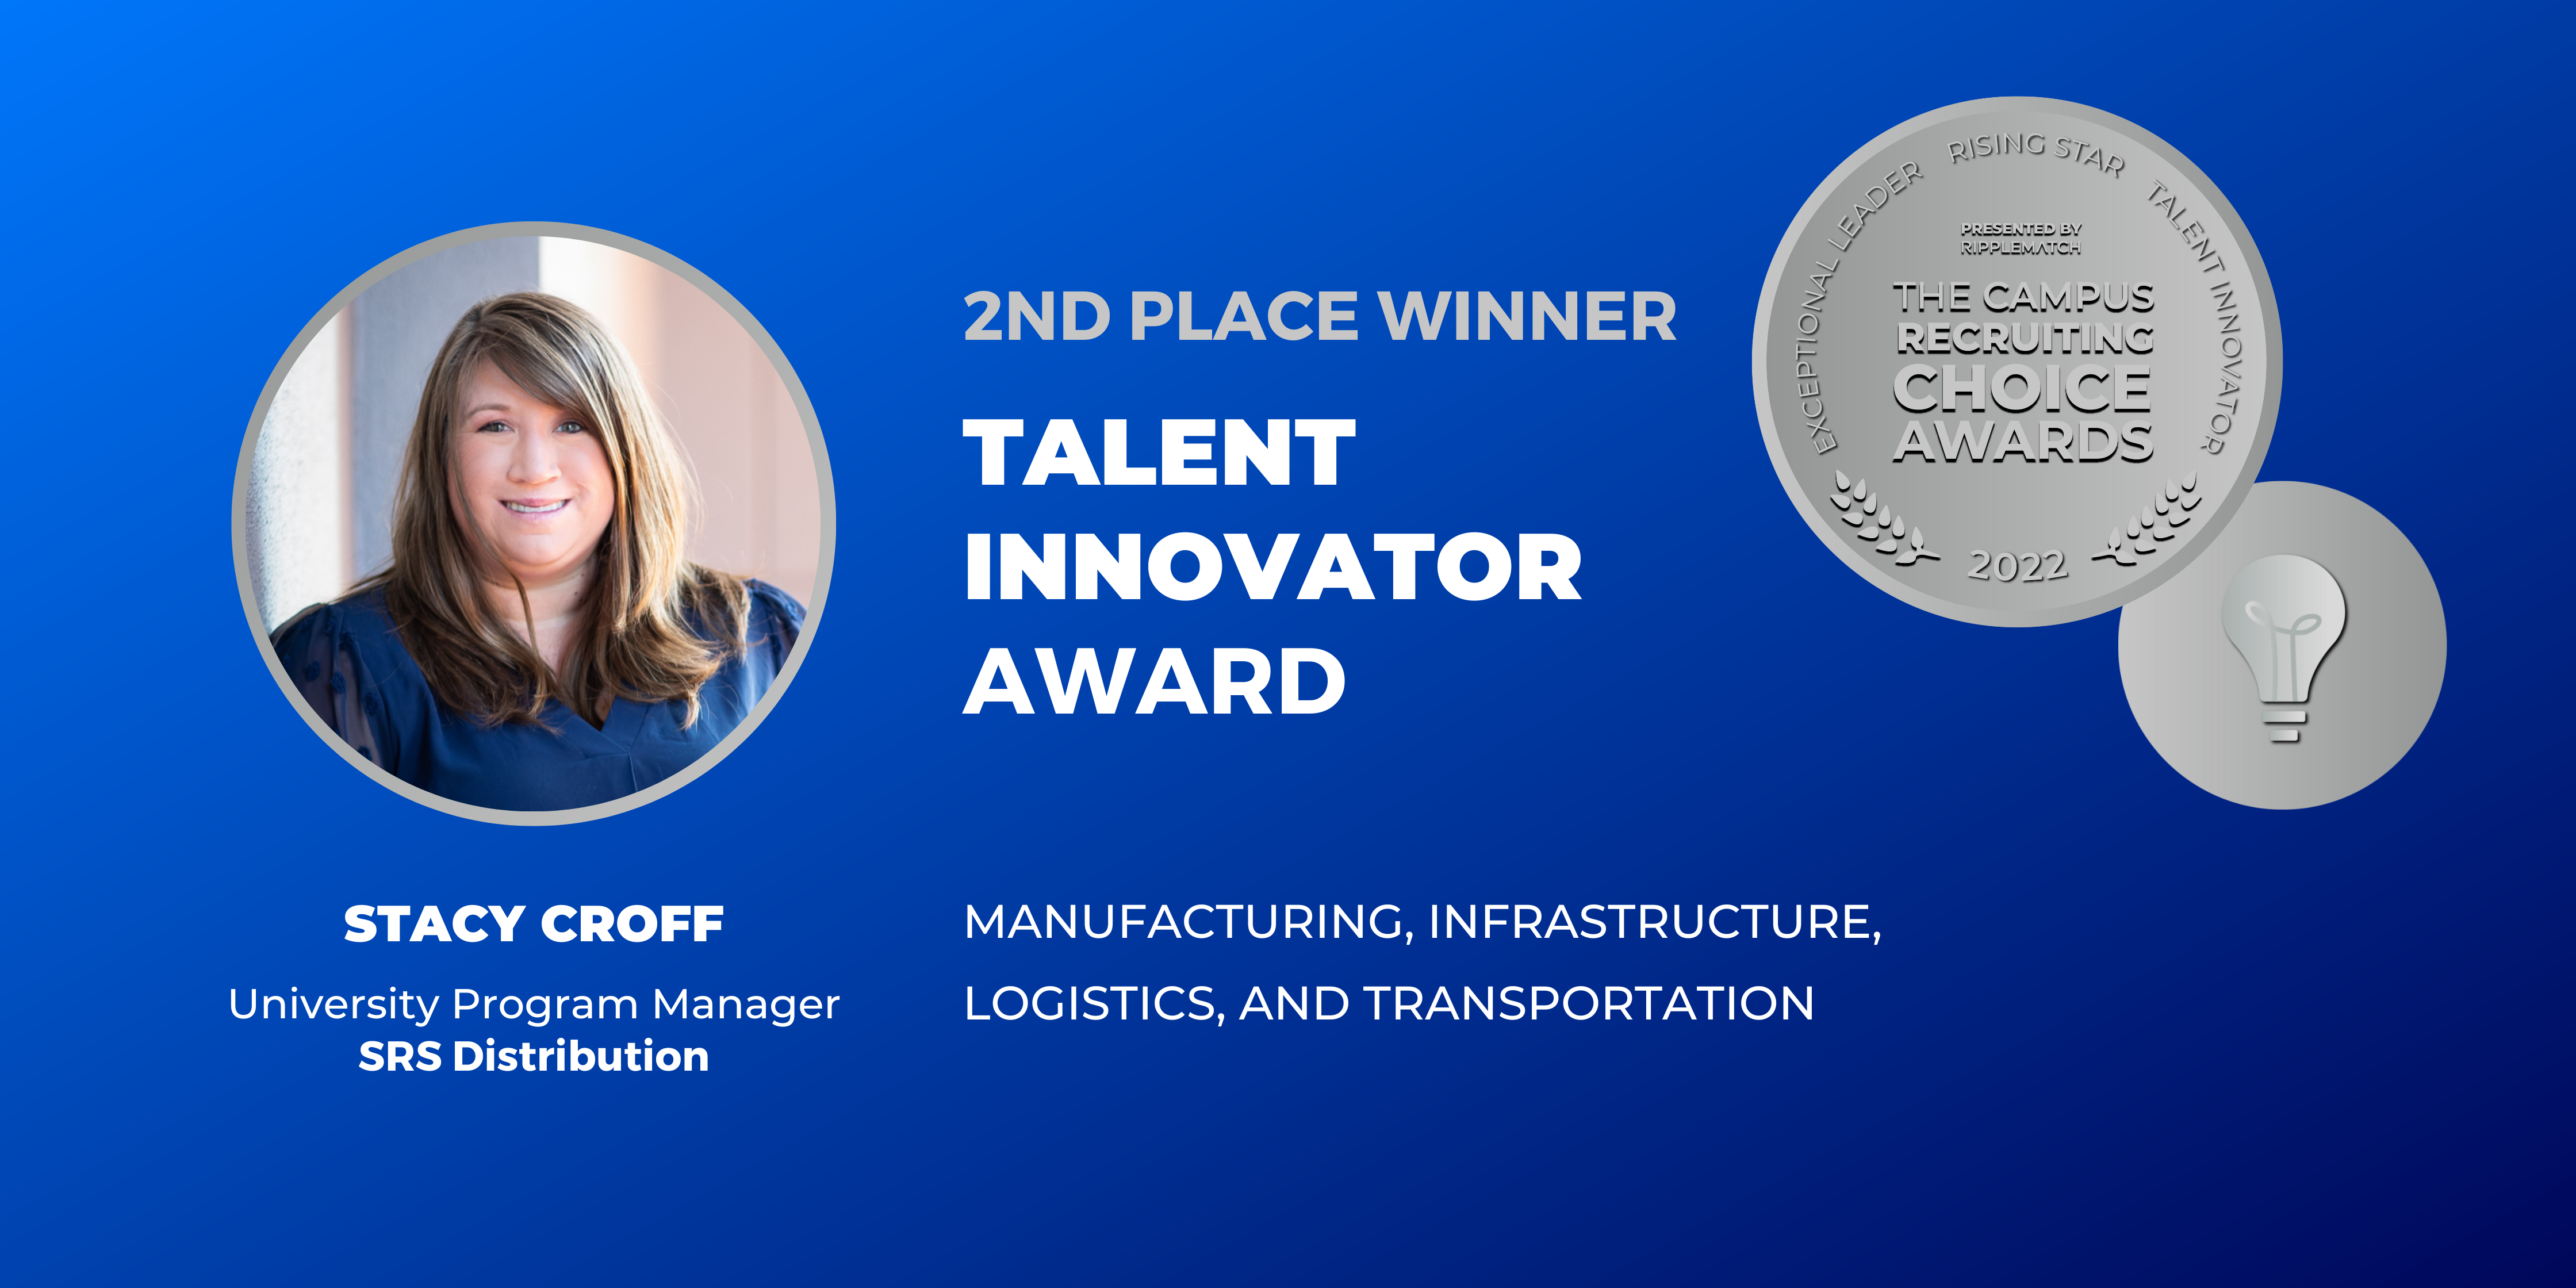 TALENT INNOVATOR - 2nd place - Manufacturing, Infrastructure, Logistics, and Transportation - Stacy Croff